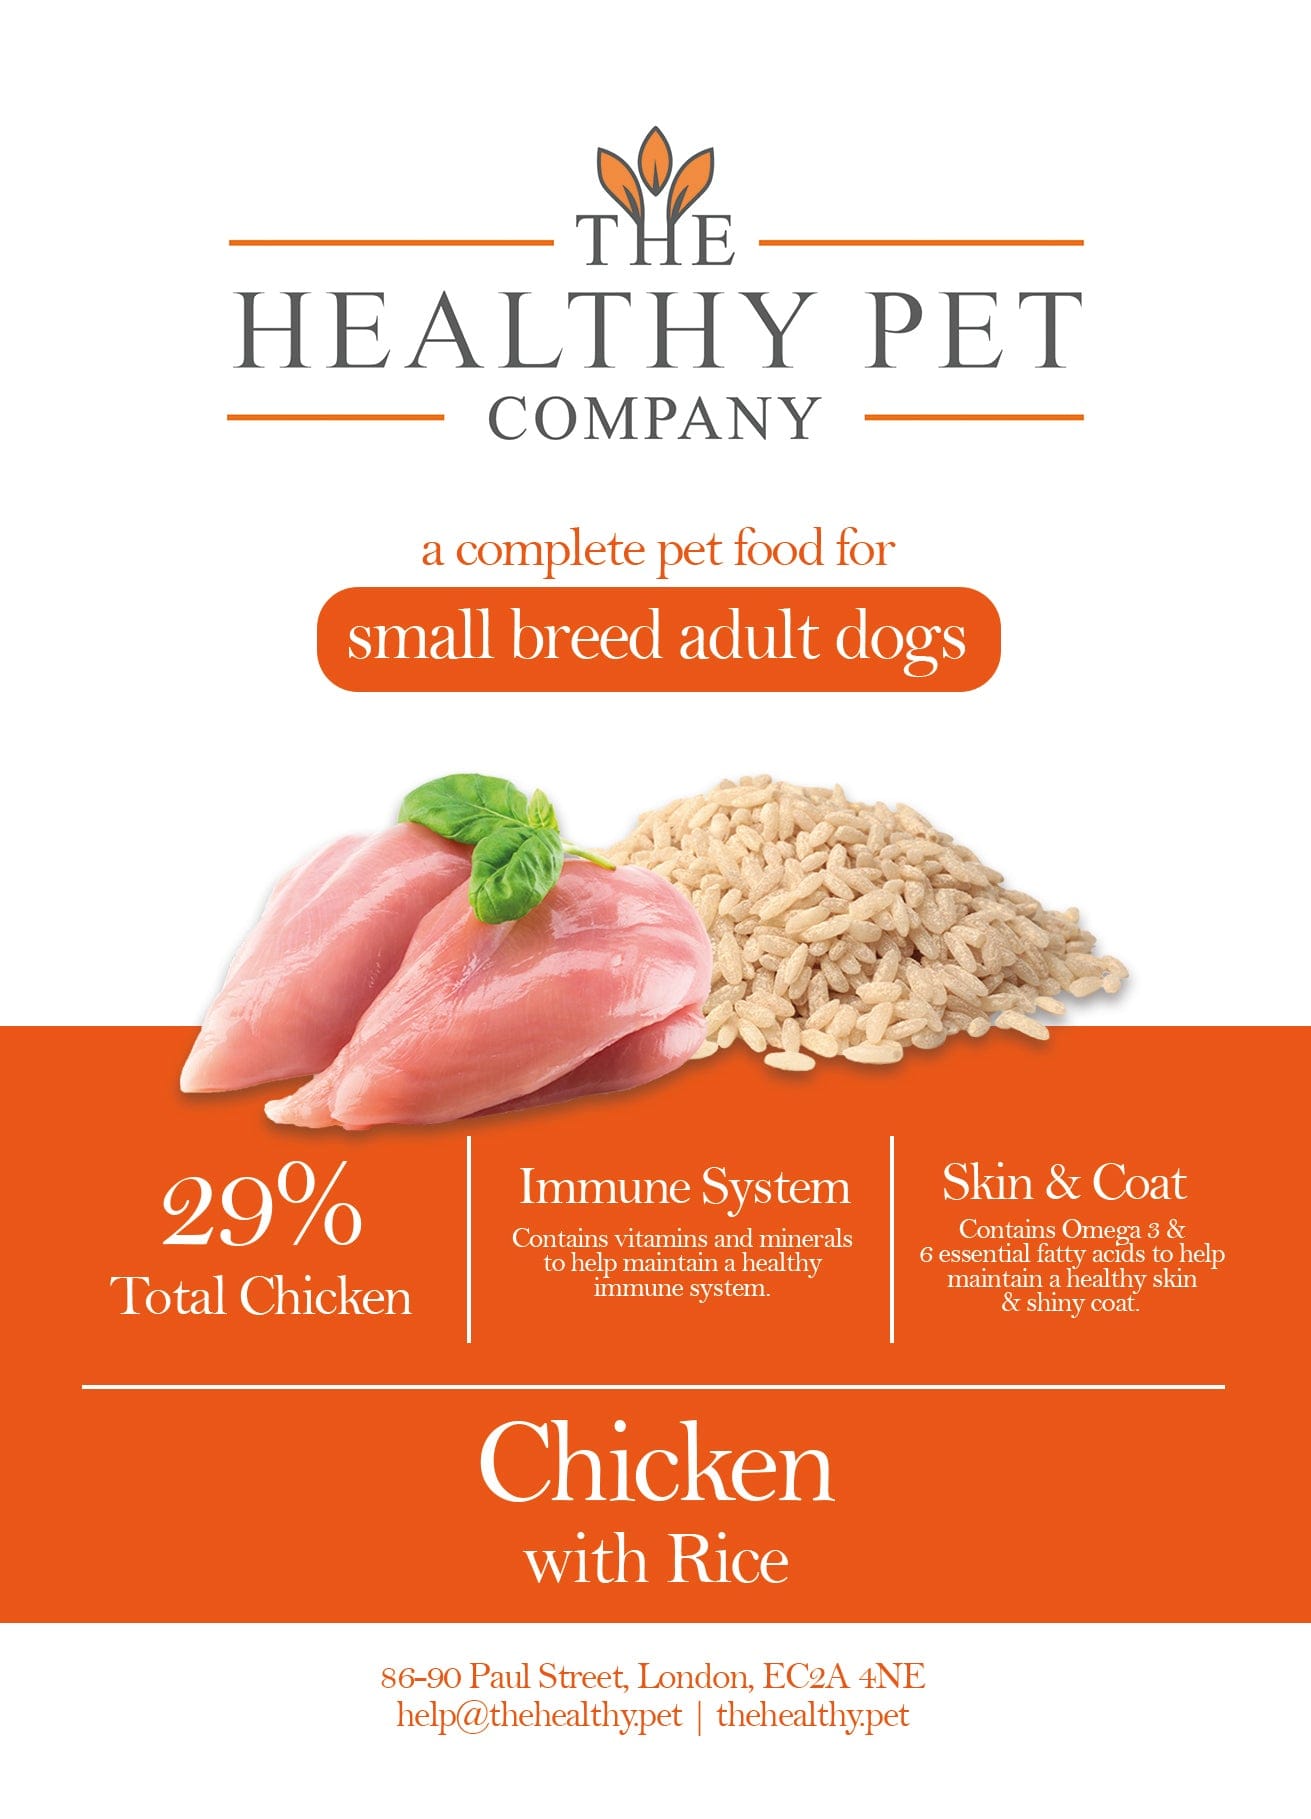 The Healthy Pet Company Complete Meal - Chicken with Rice for Small Breed Adult Dogs - The Healthy Pet Company